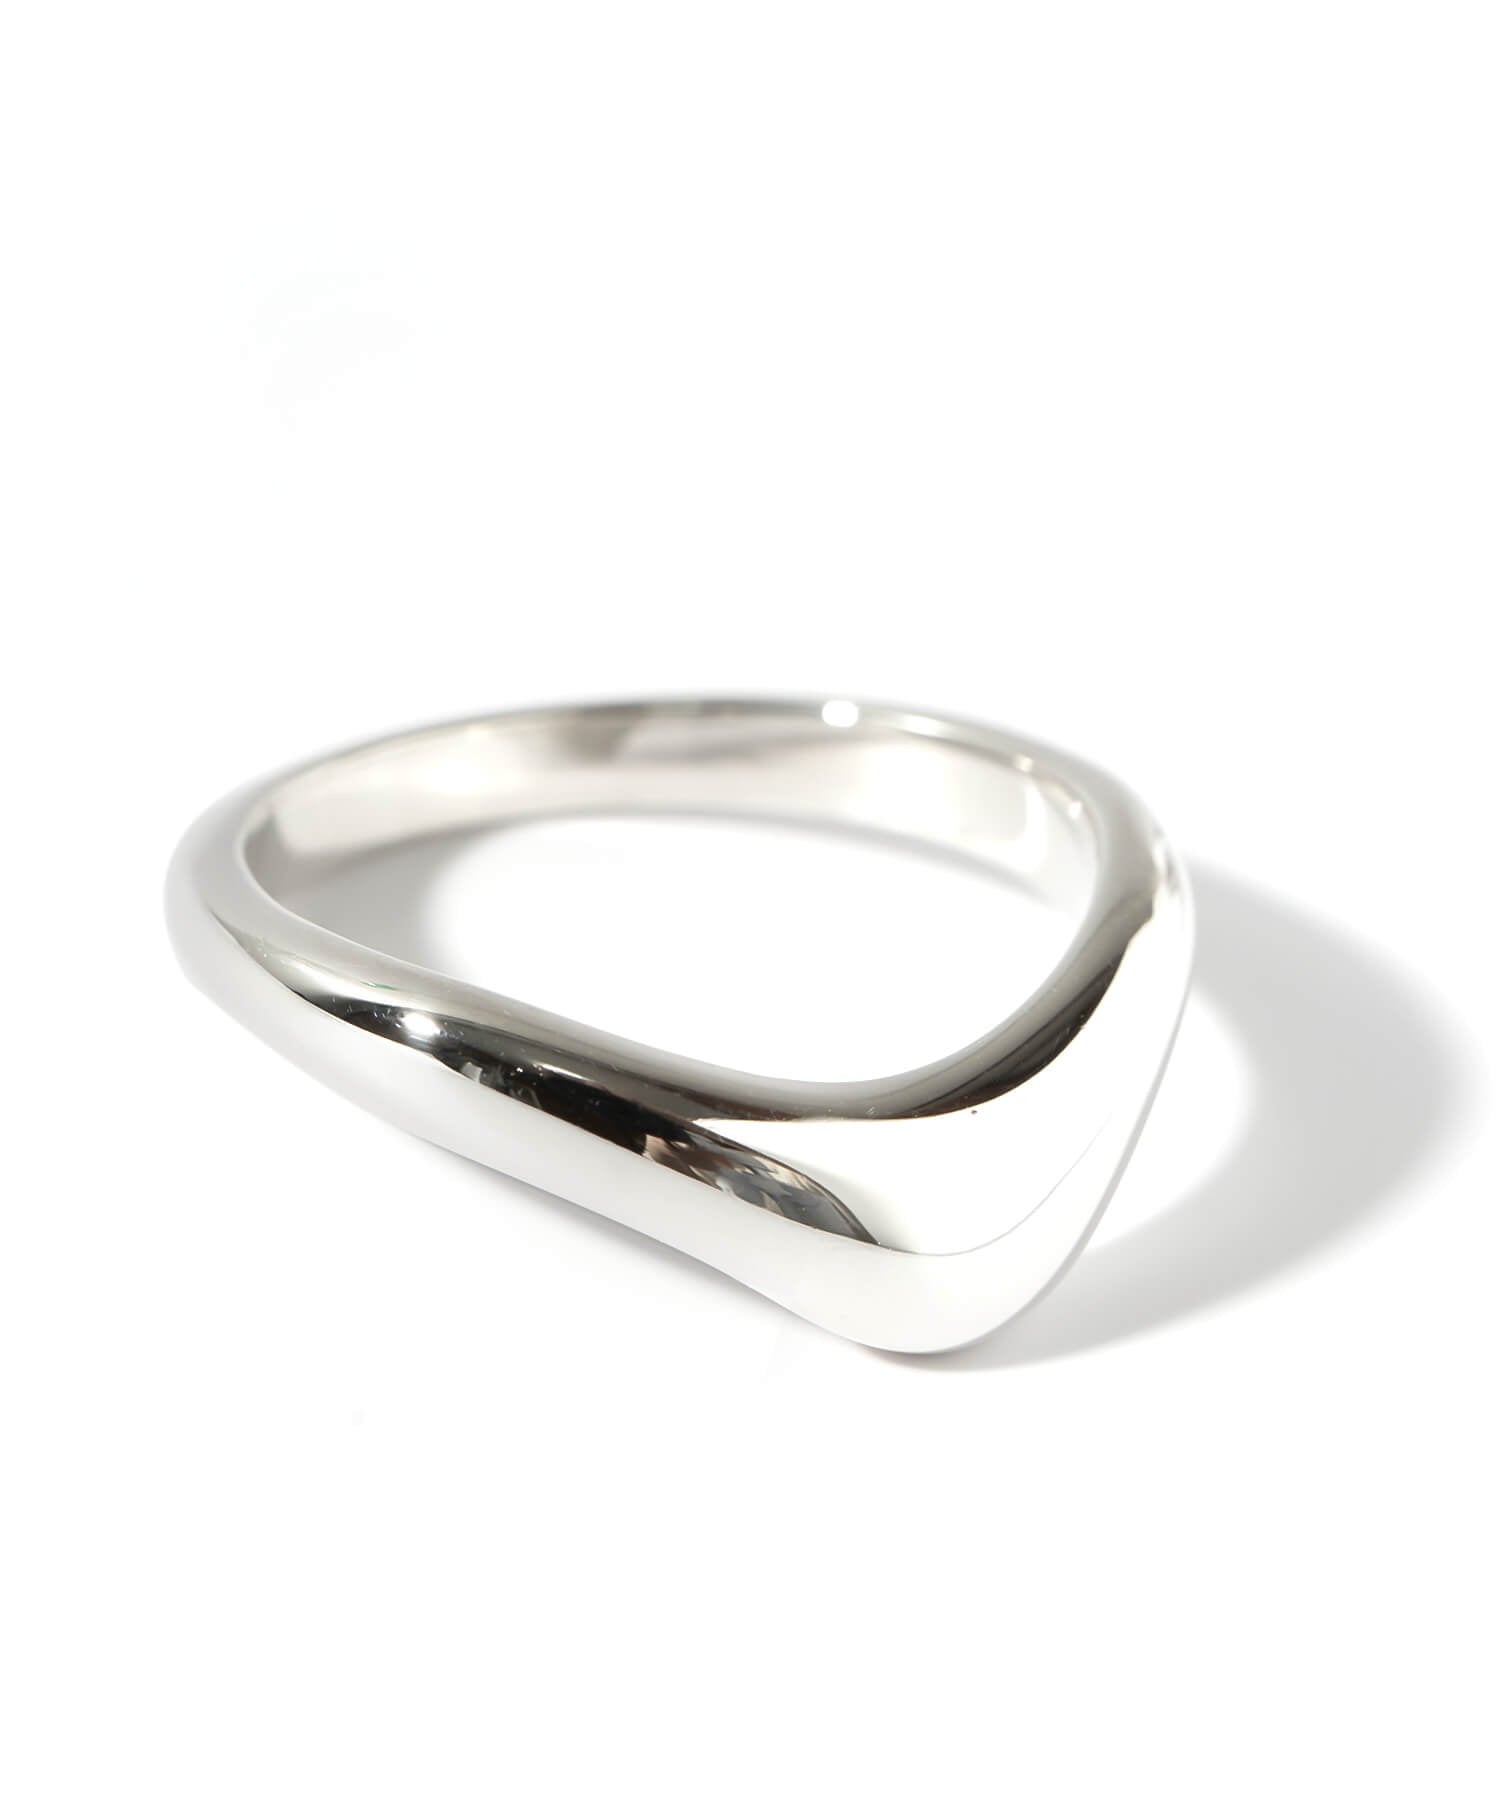 Silver925 Plump Wedge Ring | NERO SILVER WEDGE RING – Ops. Jewelry